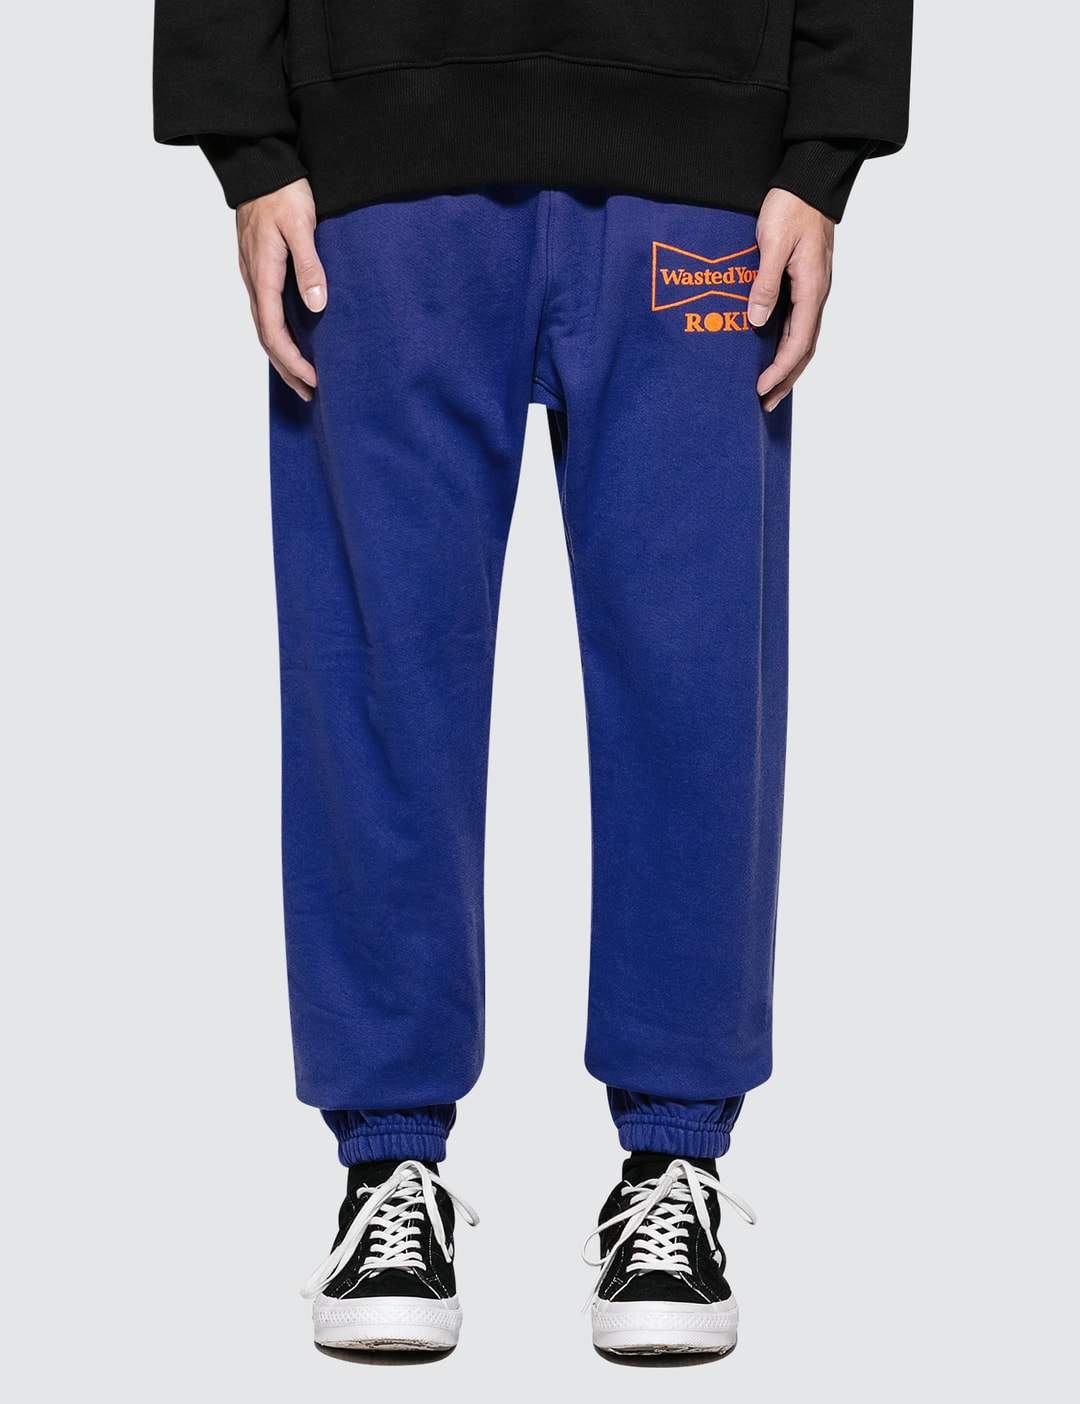 Rokit - Wasted Youth x Rokit Cruiser Sweatpant | HBX - Globally Curated ...